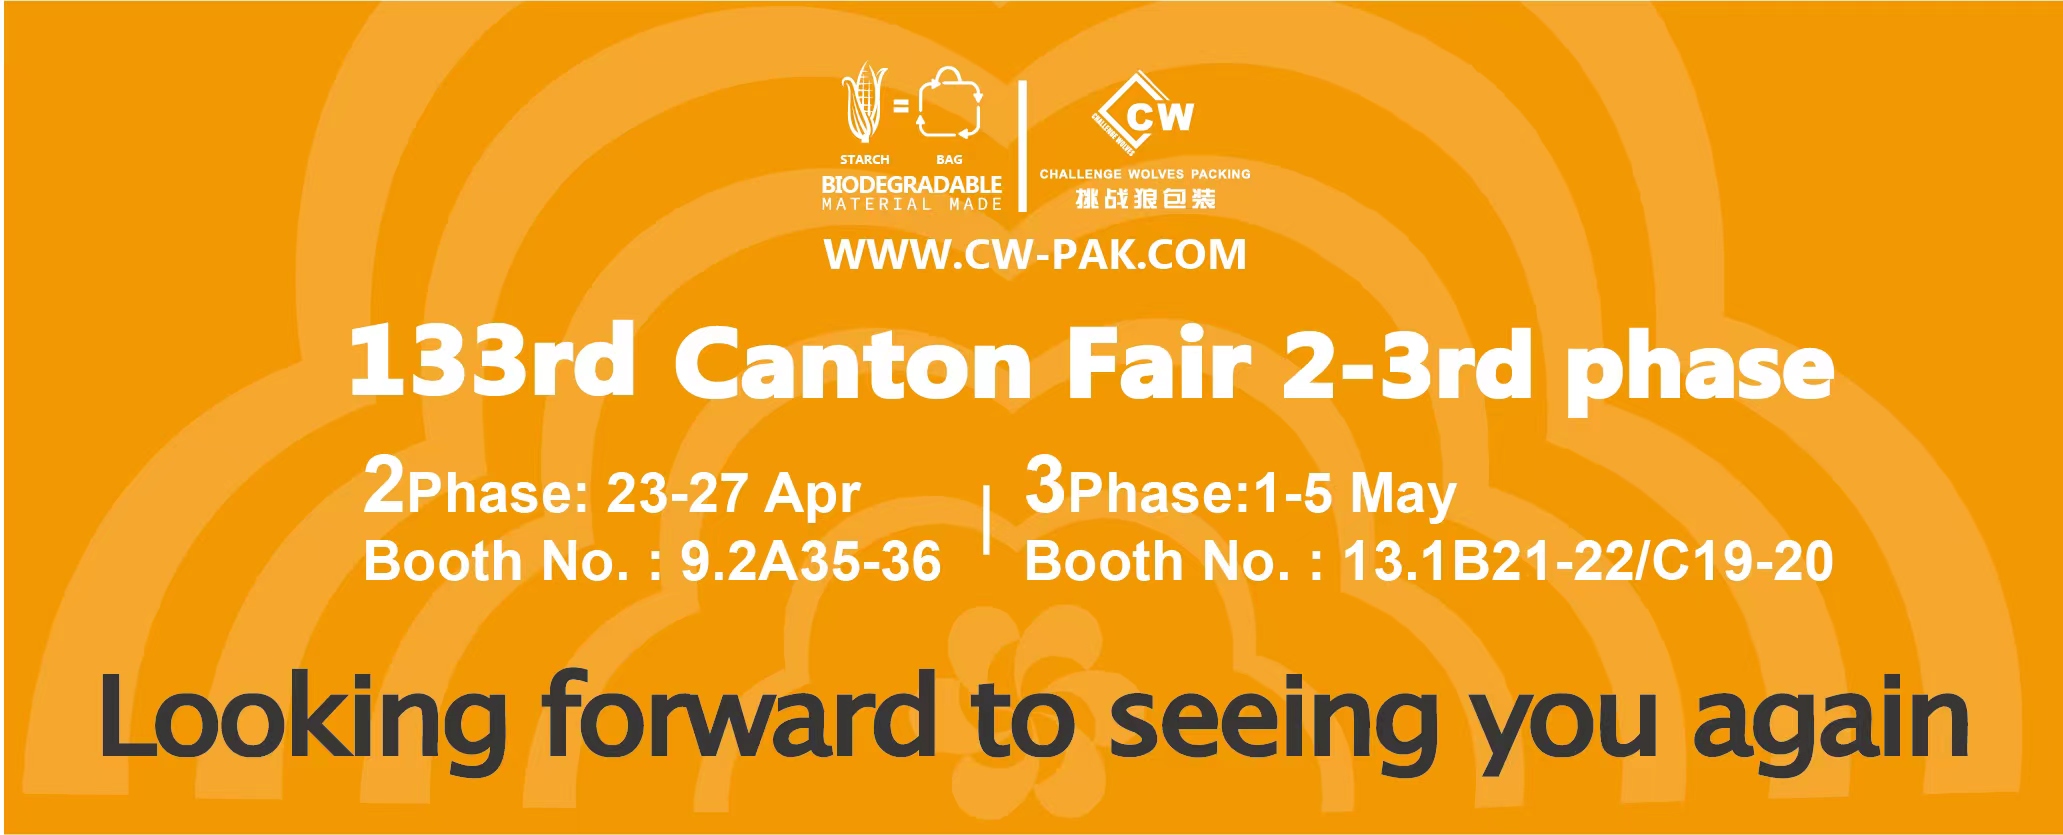 Welcome to 133rd Canton fair 2-3rd phase